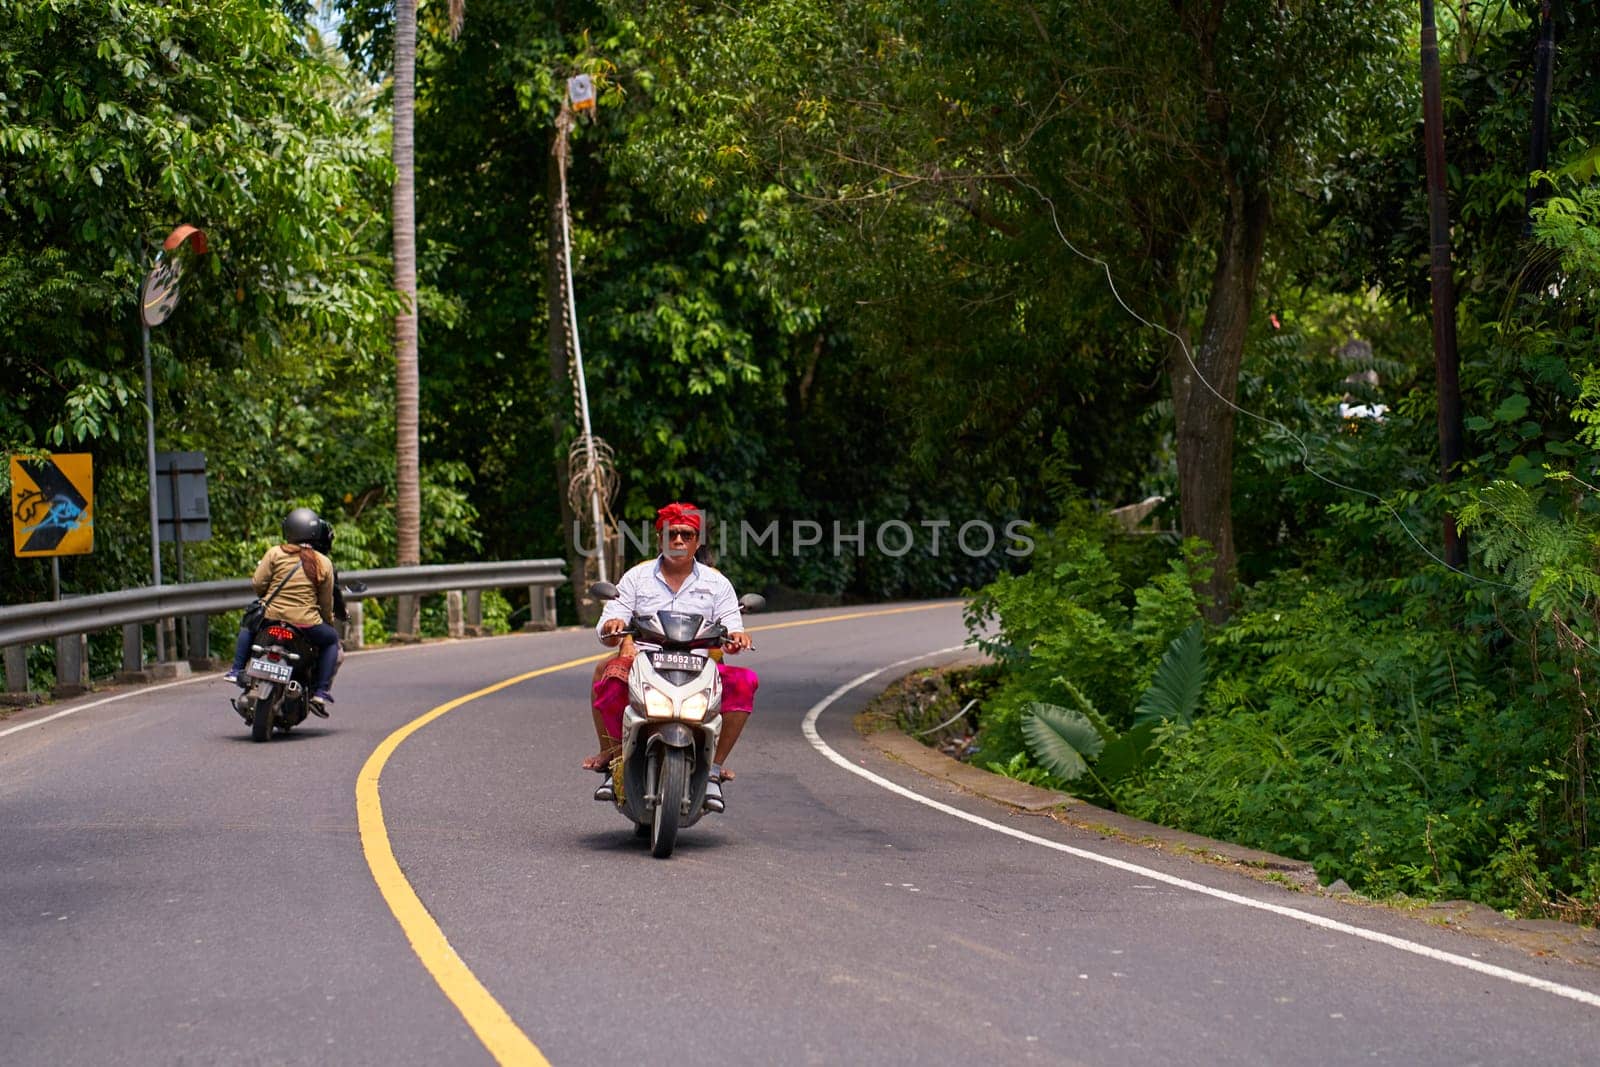 A person on a motorcycle rides a scenic asphalt road in Asia. Bali, Indonesia - 12.10.2022